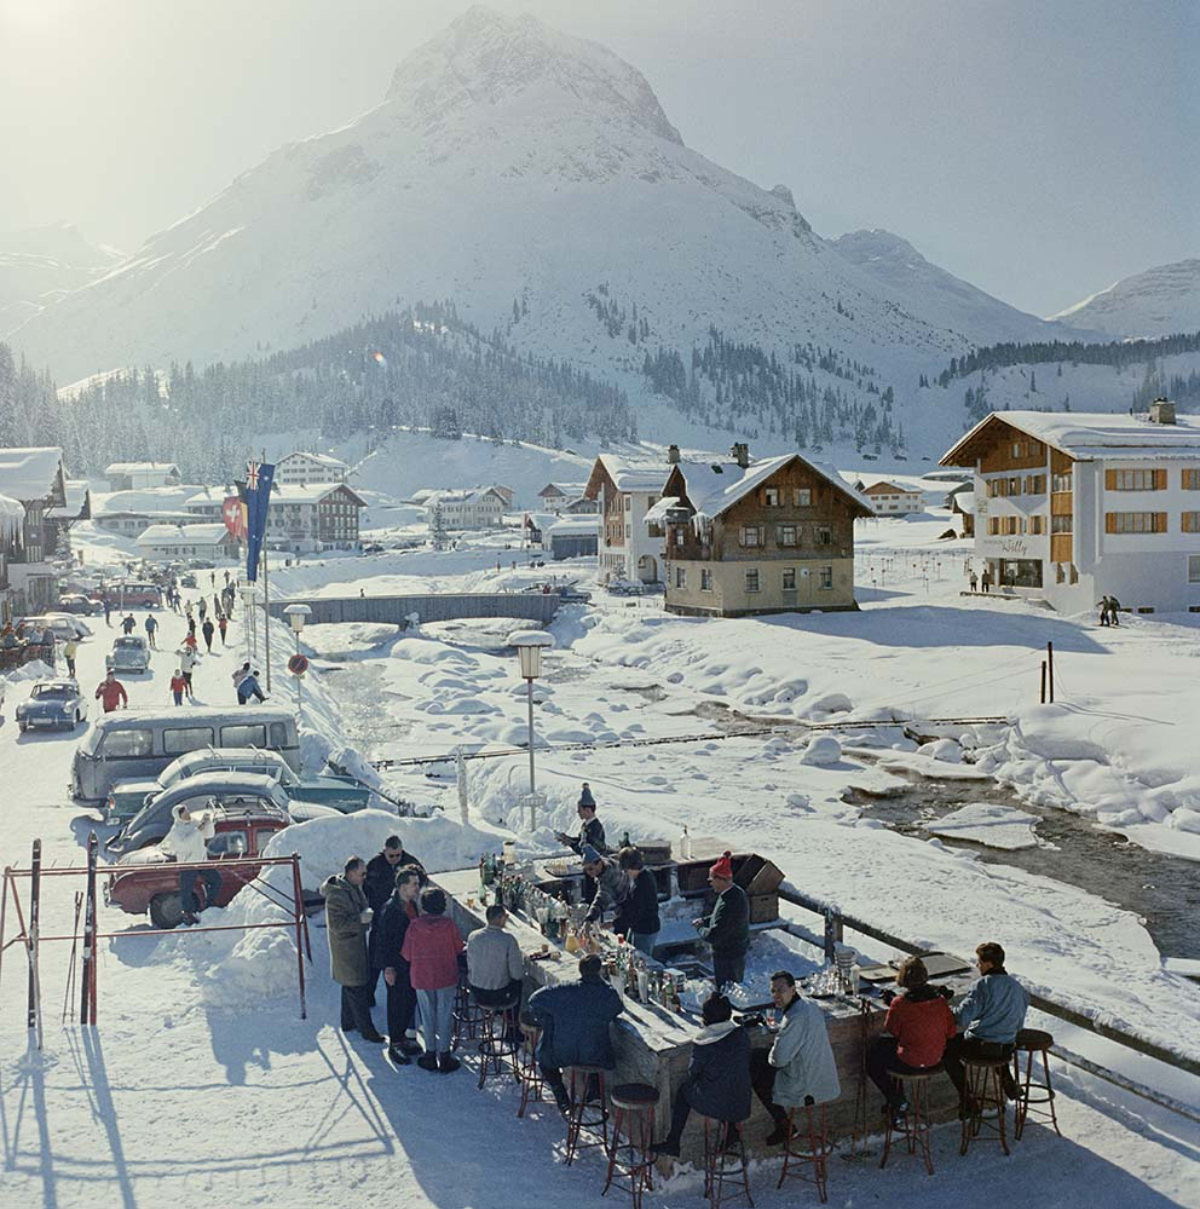 The Ice Bar at the Hotel Krone in Lech, Austria, 1960. The mountain in the background is the Omershorn.